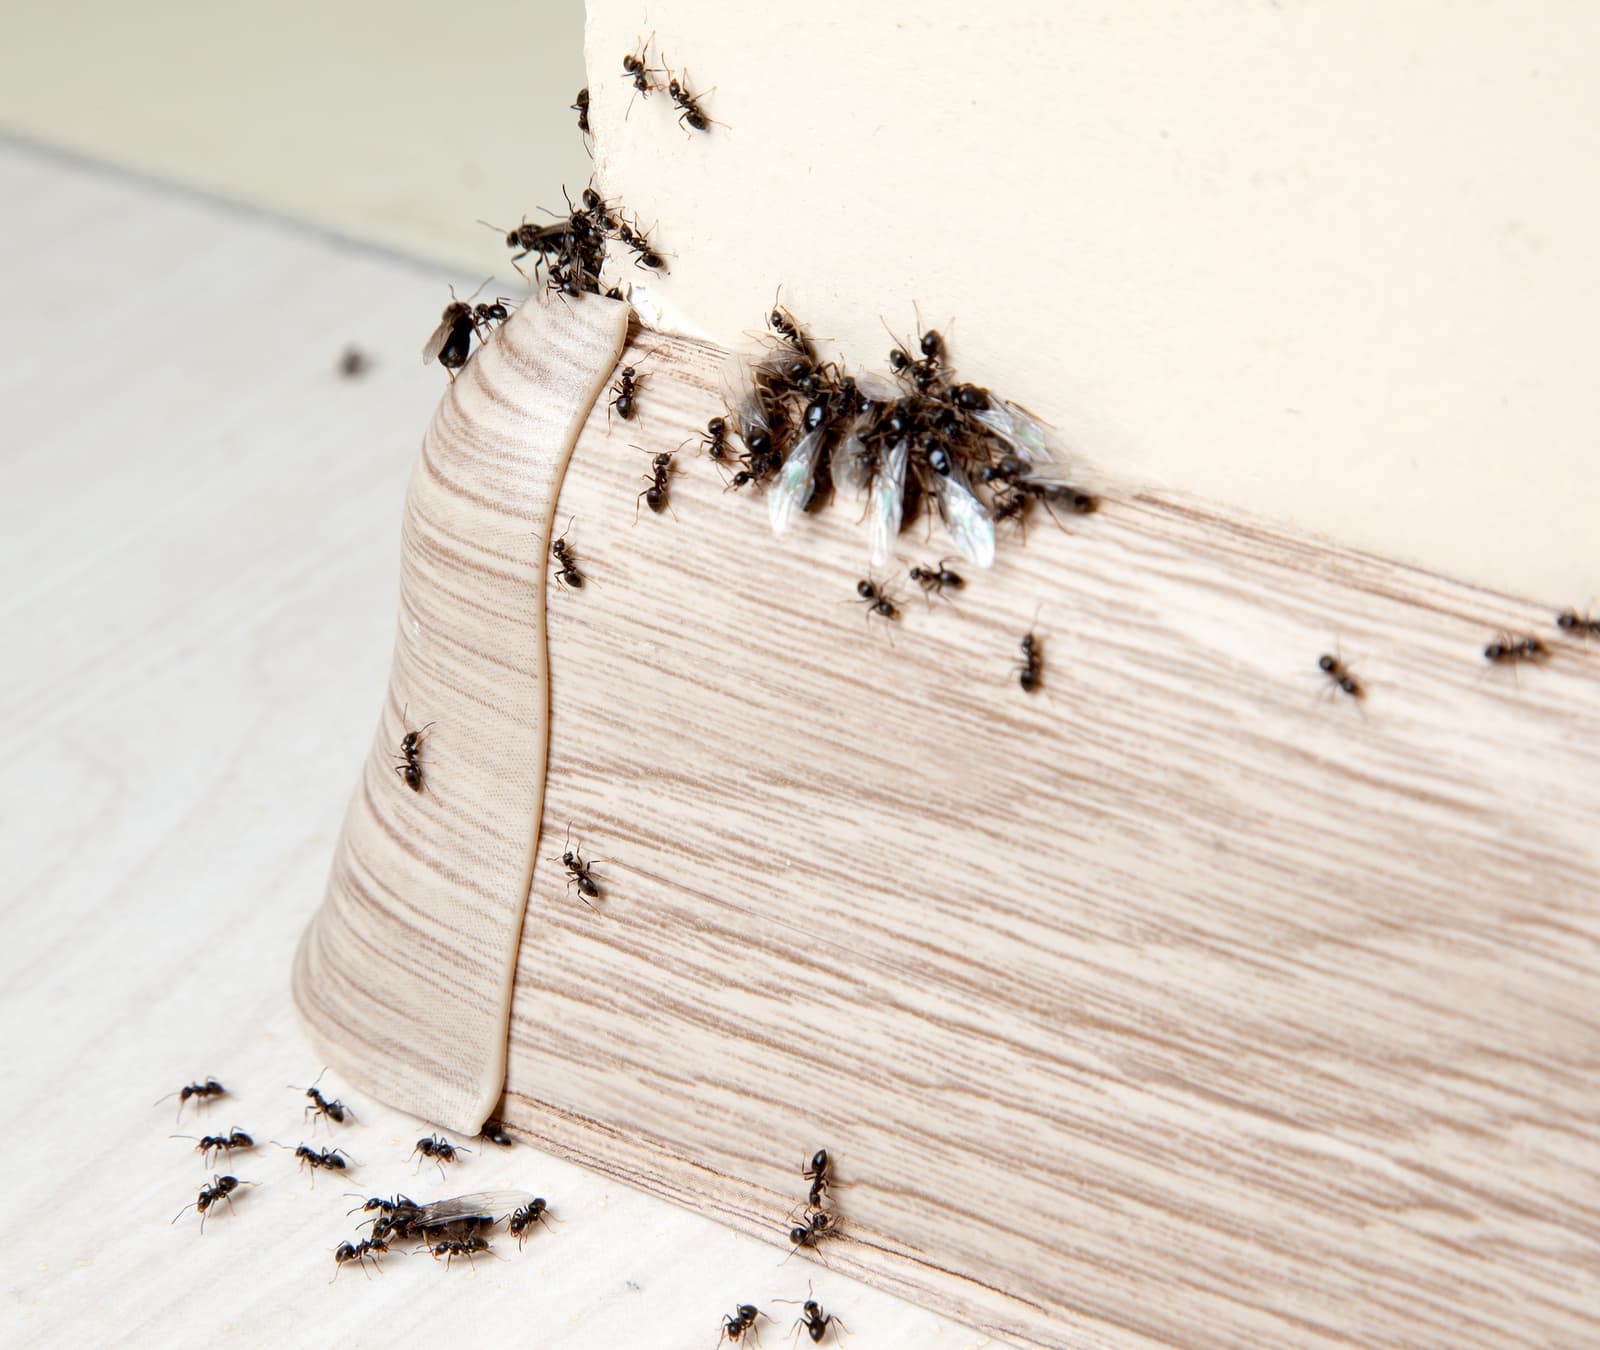 ants as pests